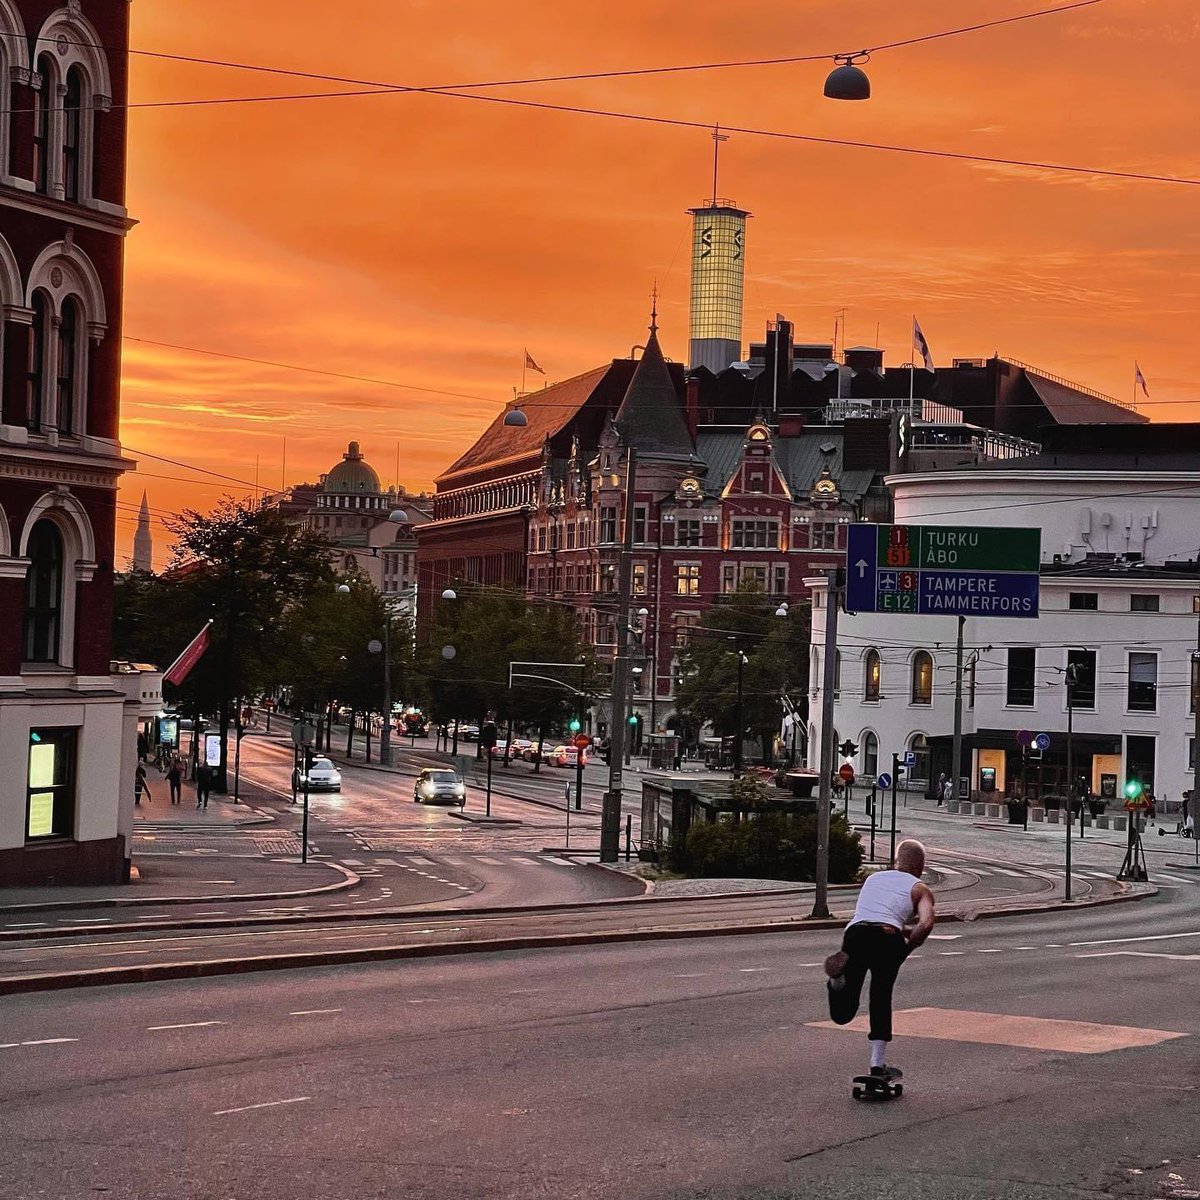 RT @juuuso: Awesome snap of Helsinki in midsummer by @lindstromphoto https://t.co/98ZftxdcJx